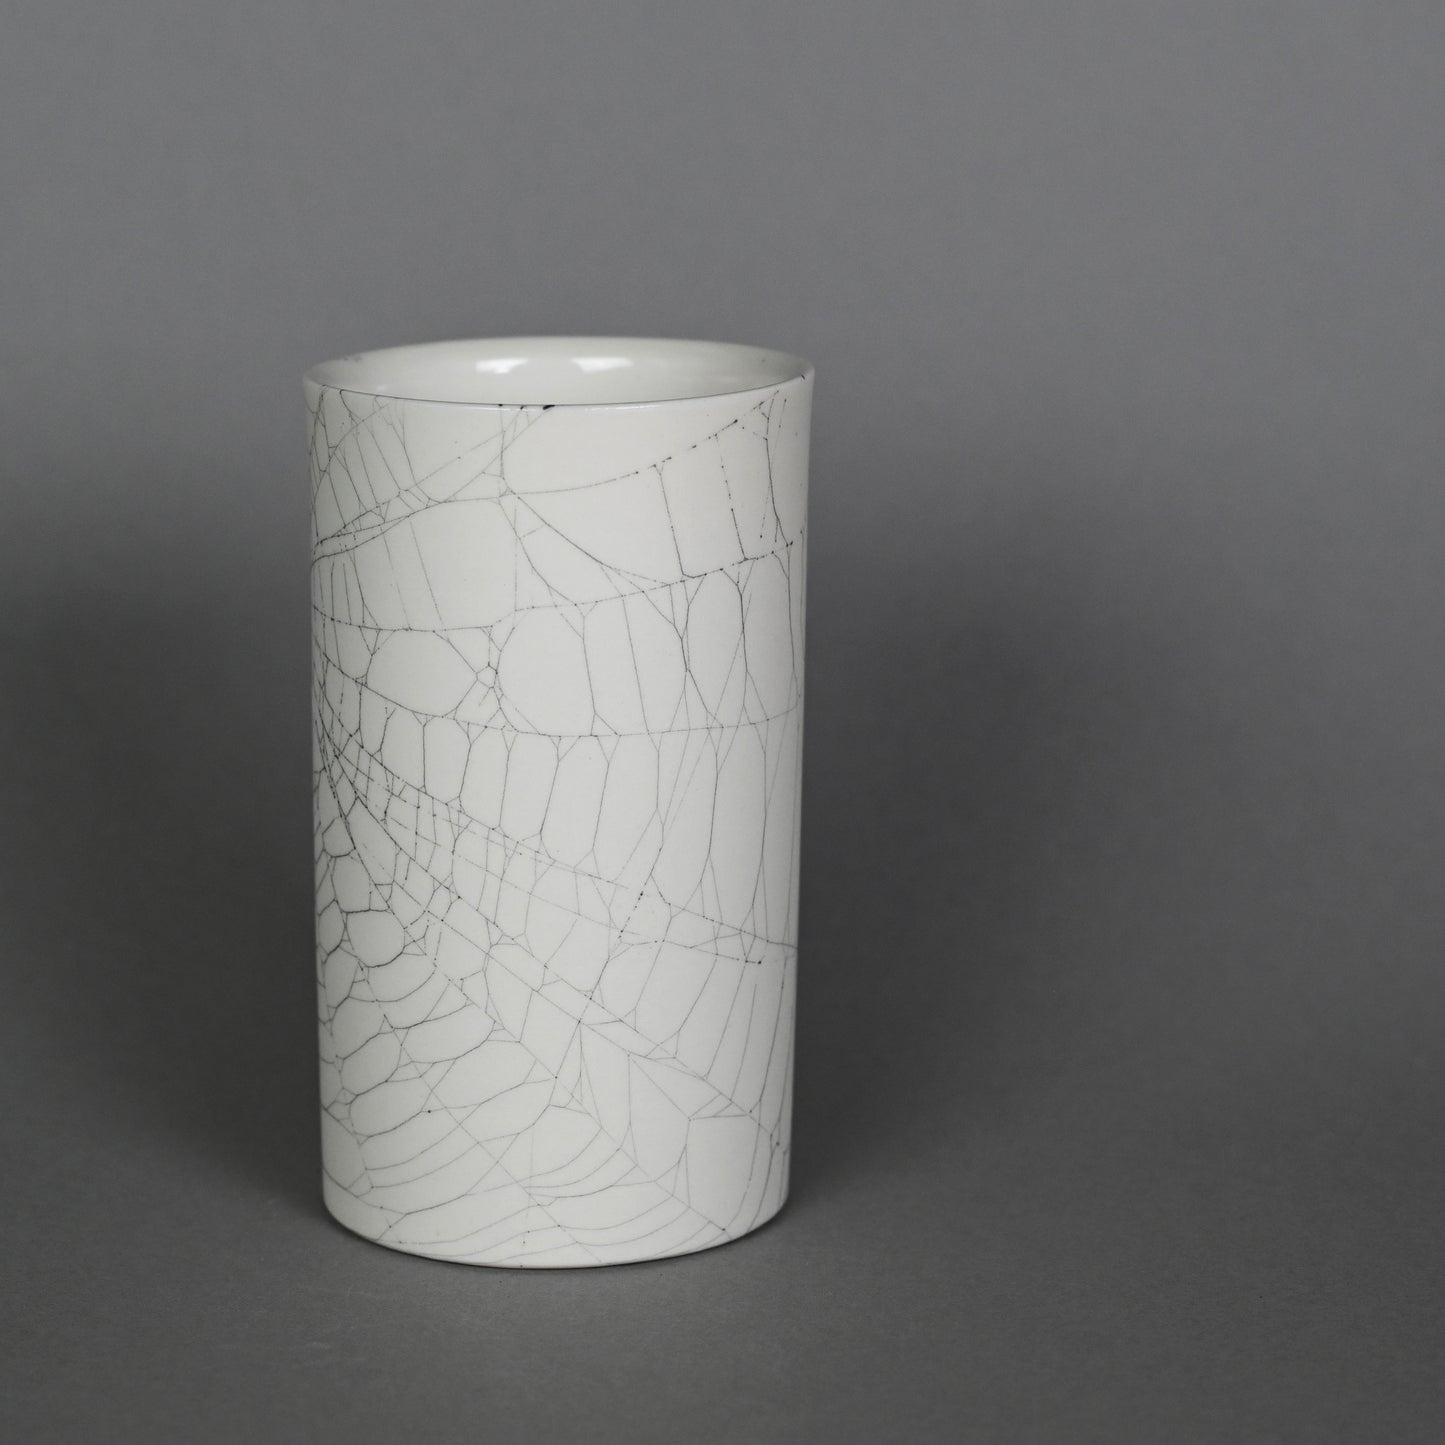 Web on Clay (198), Collected September 19, 2022